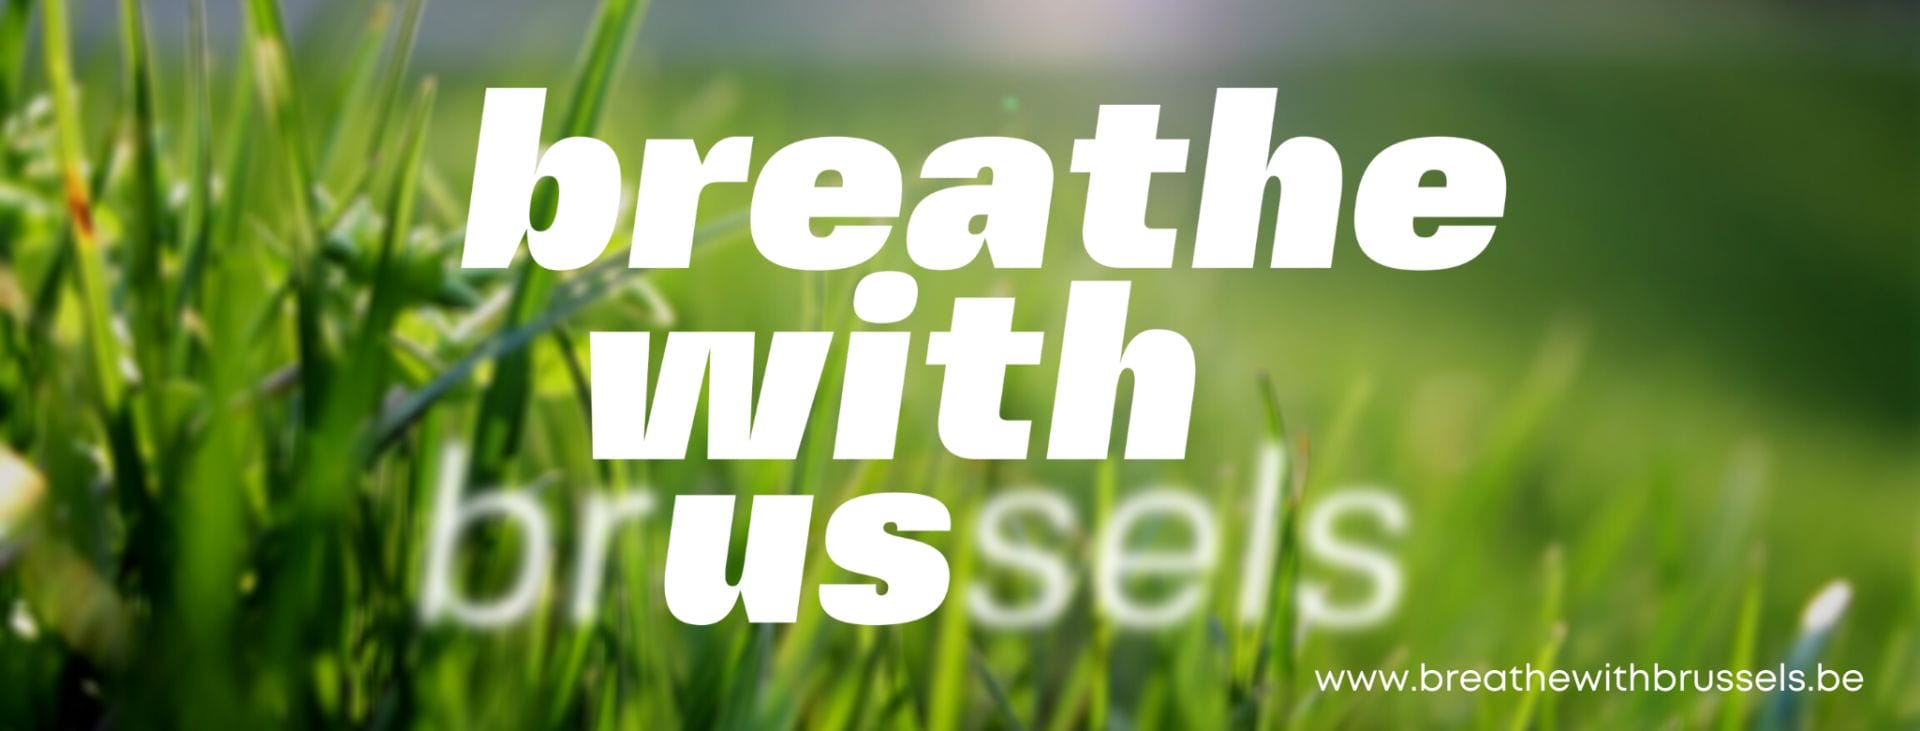 Breathe with Brussels - Facebook Cover - 1